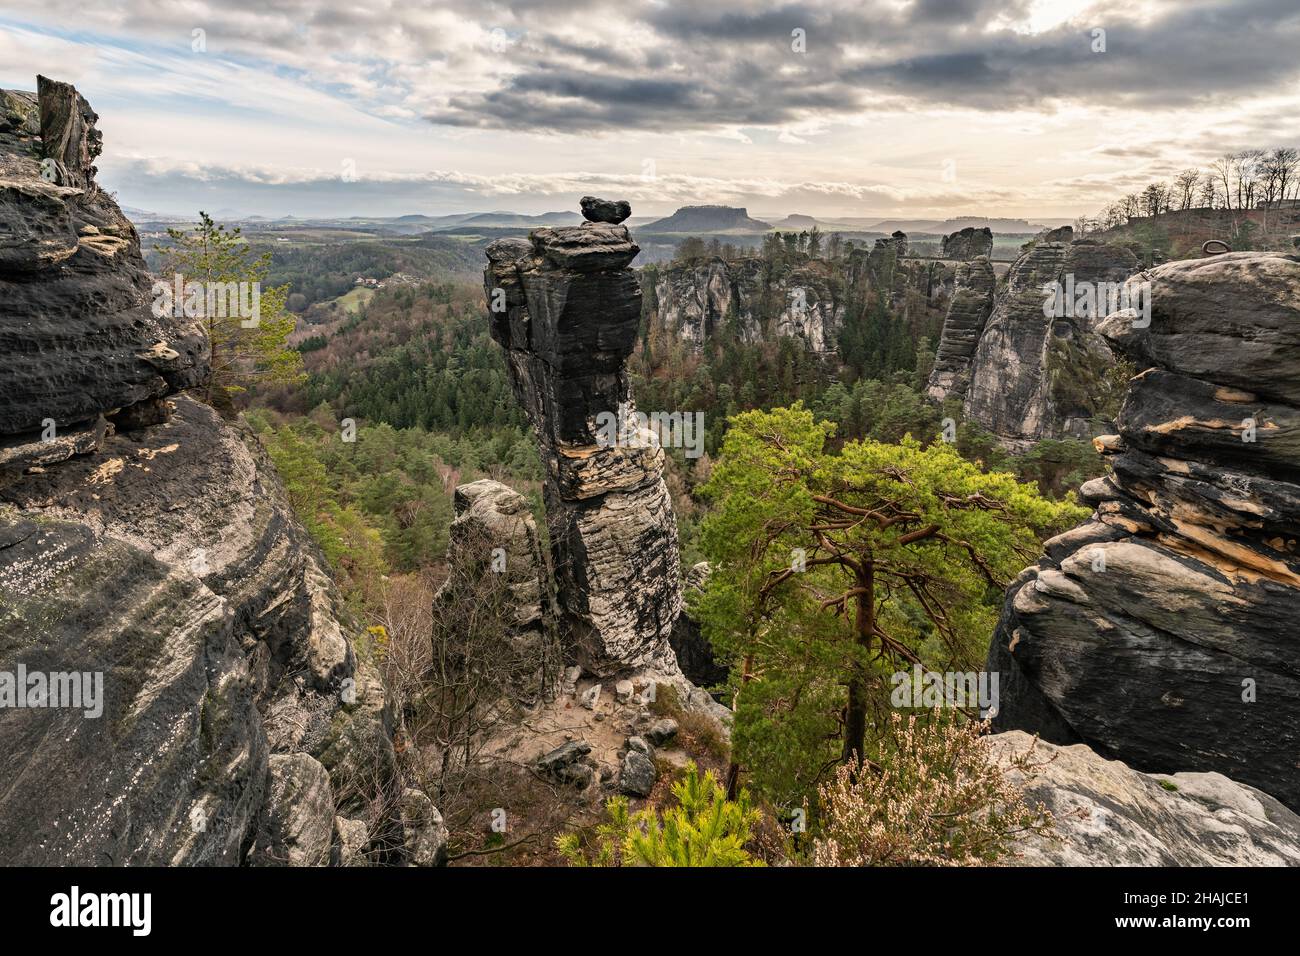 Elbe Sandstone Mountains - View in the Bastei area towards southeast, prominent rock formation and tree in foreground, backlight, contrasting sky with Stock Photo